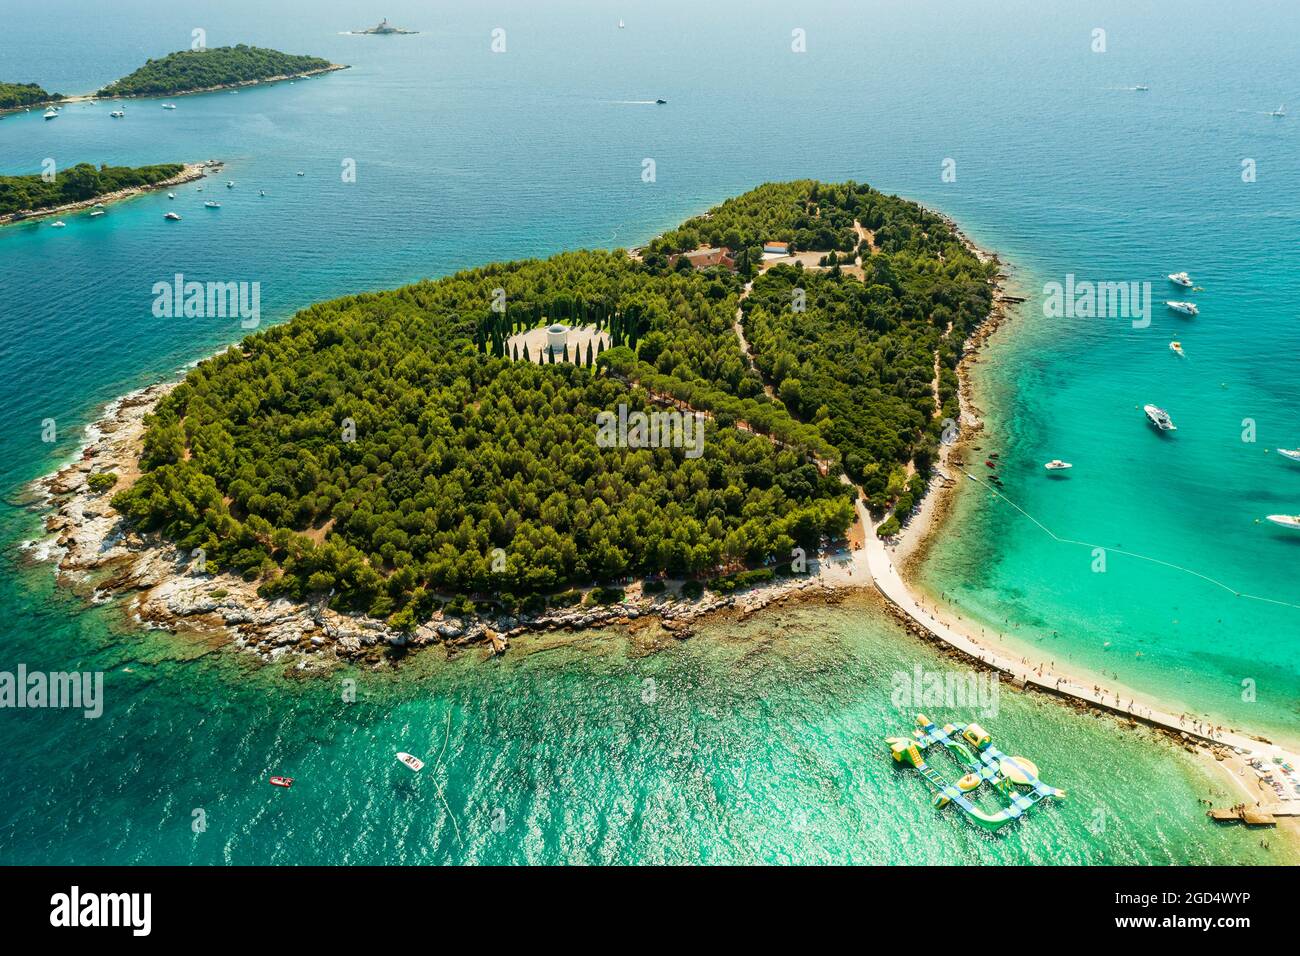 Red island near by Rovinj city in Croatia. Croatian name is Otocic Maskin. It has a hotel, aquapark, chruch monument and amazing beaches Stock Photo